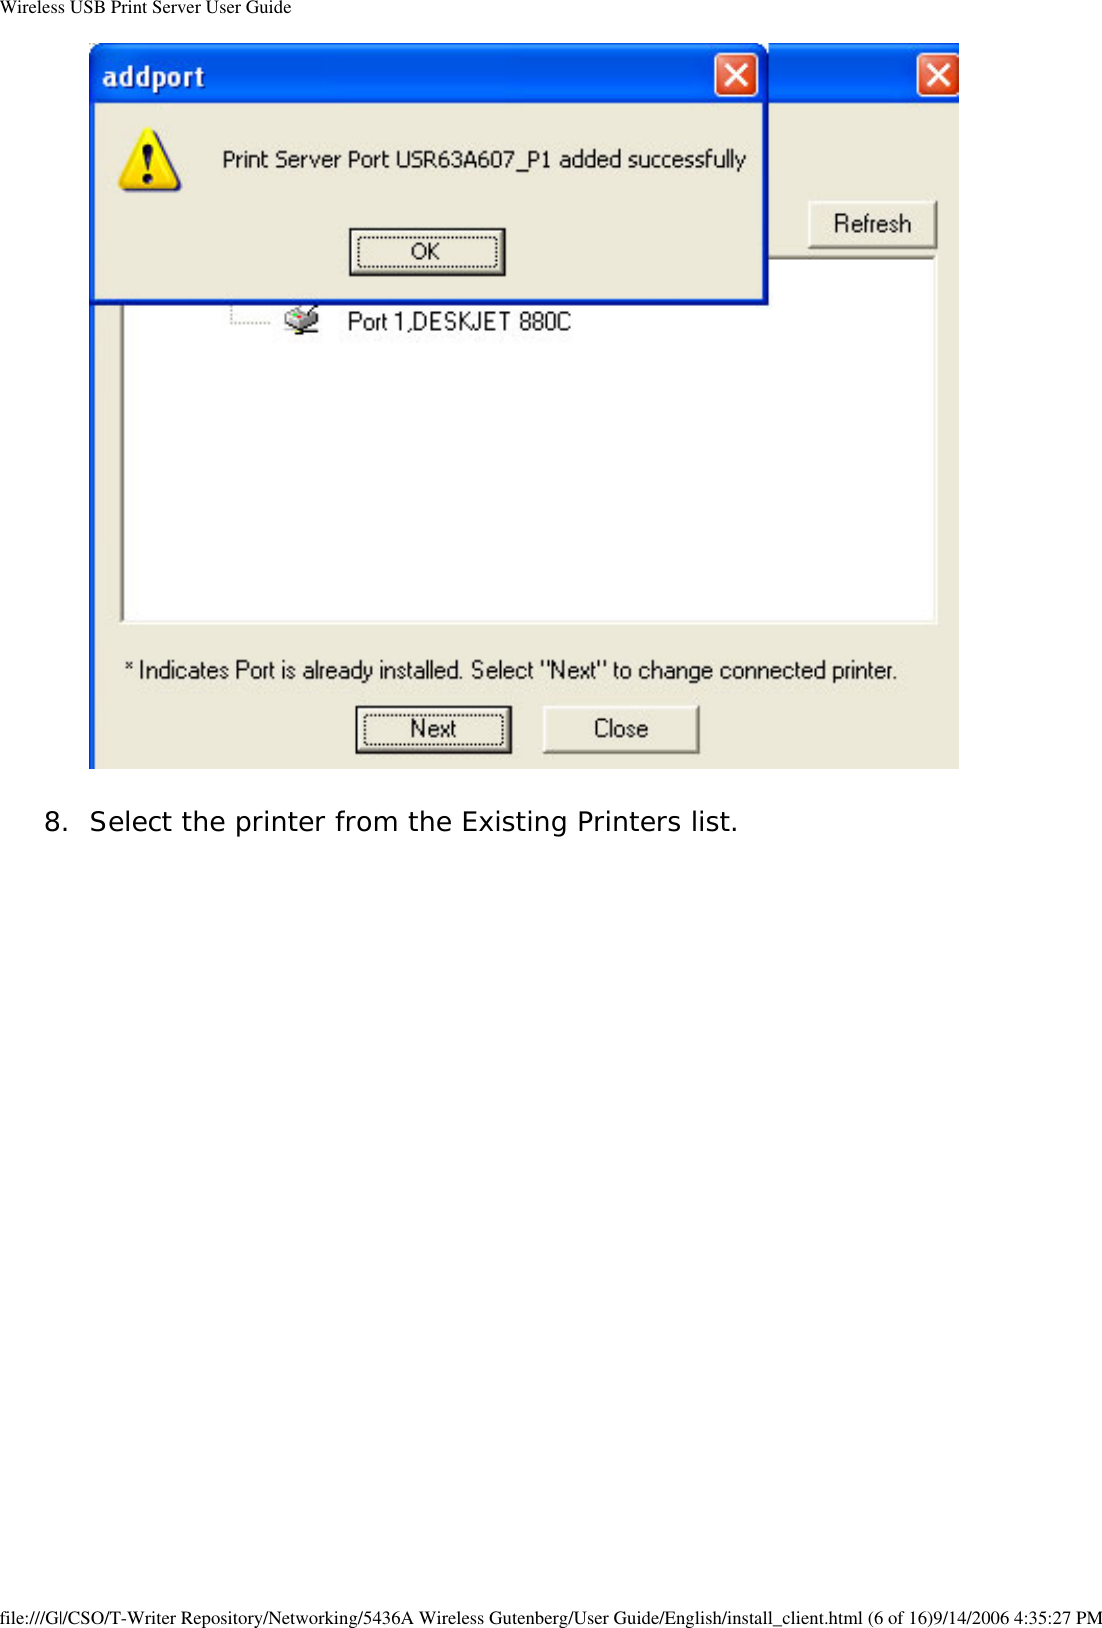 Wireless USB Print Server User Guide  8.  Select the printer from the Existing Printers list.  file:///G|/CSO/T-Writer Repository/Networking/5436A Wireless Gutenberg/User Guide/English/install_client.html (6 of 16)9/14/2006 4:35:27 PM